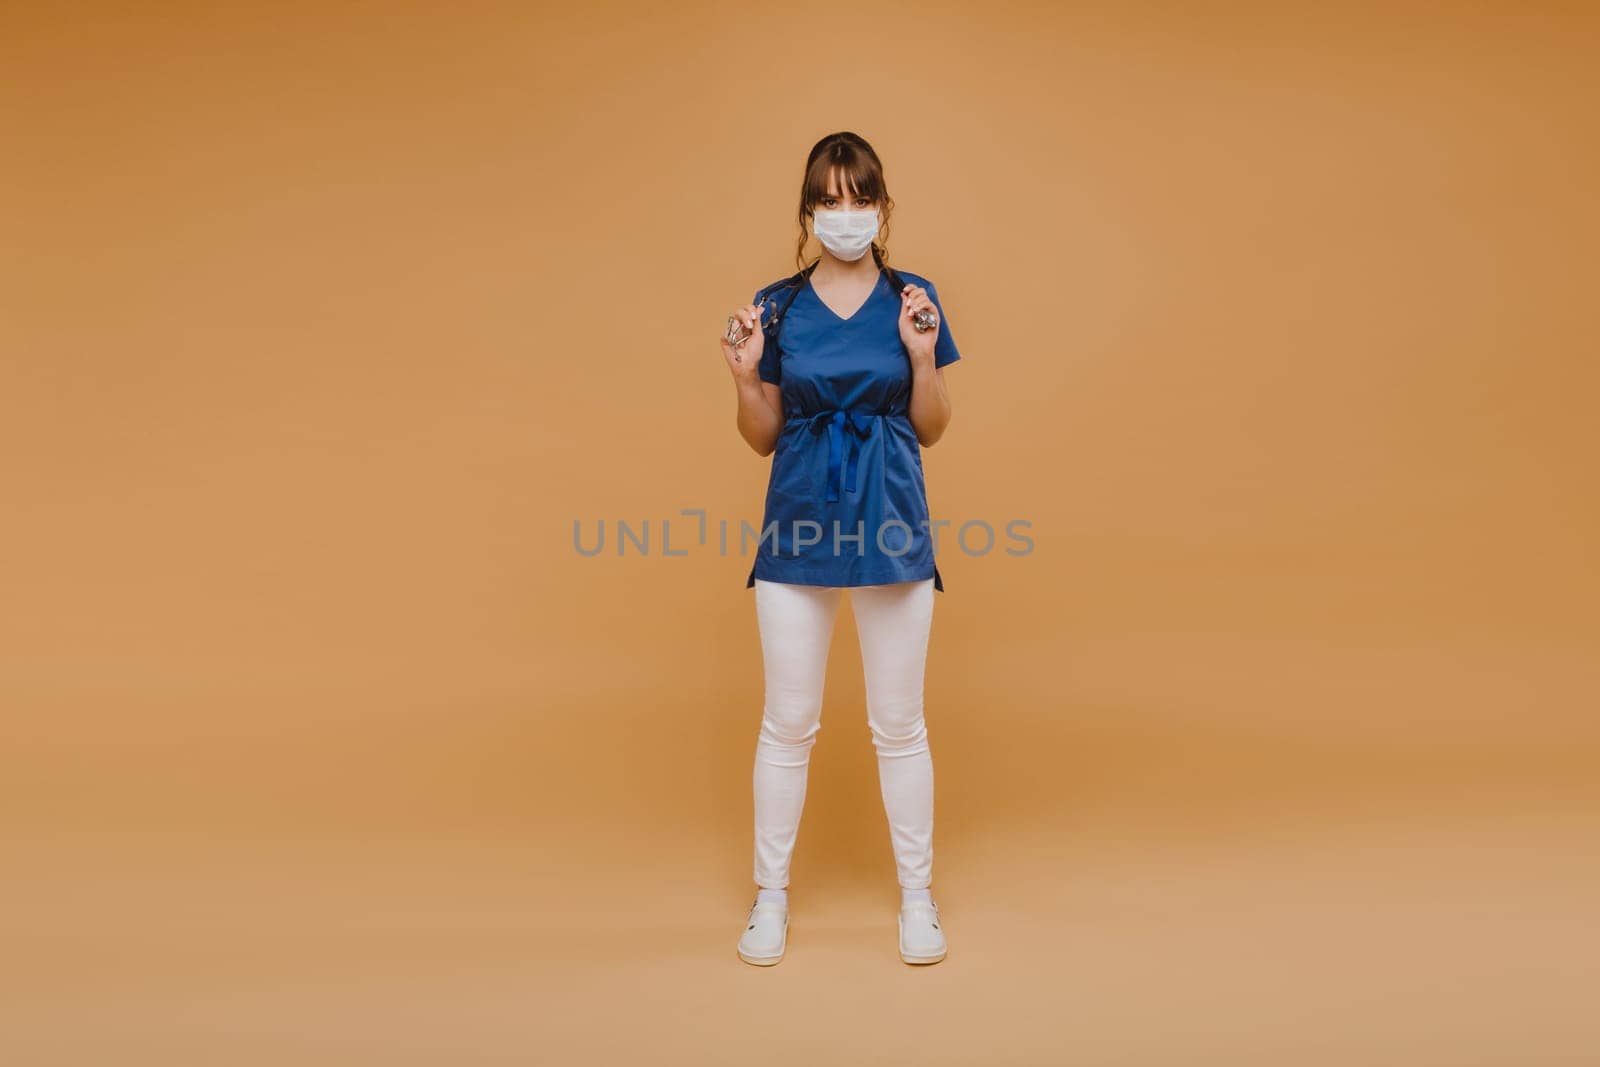 A girl doctor stands in a medical mask, isolated on a gray background